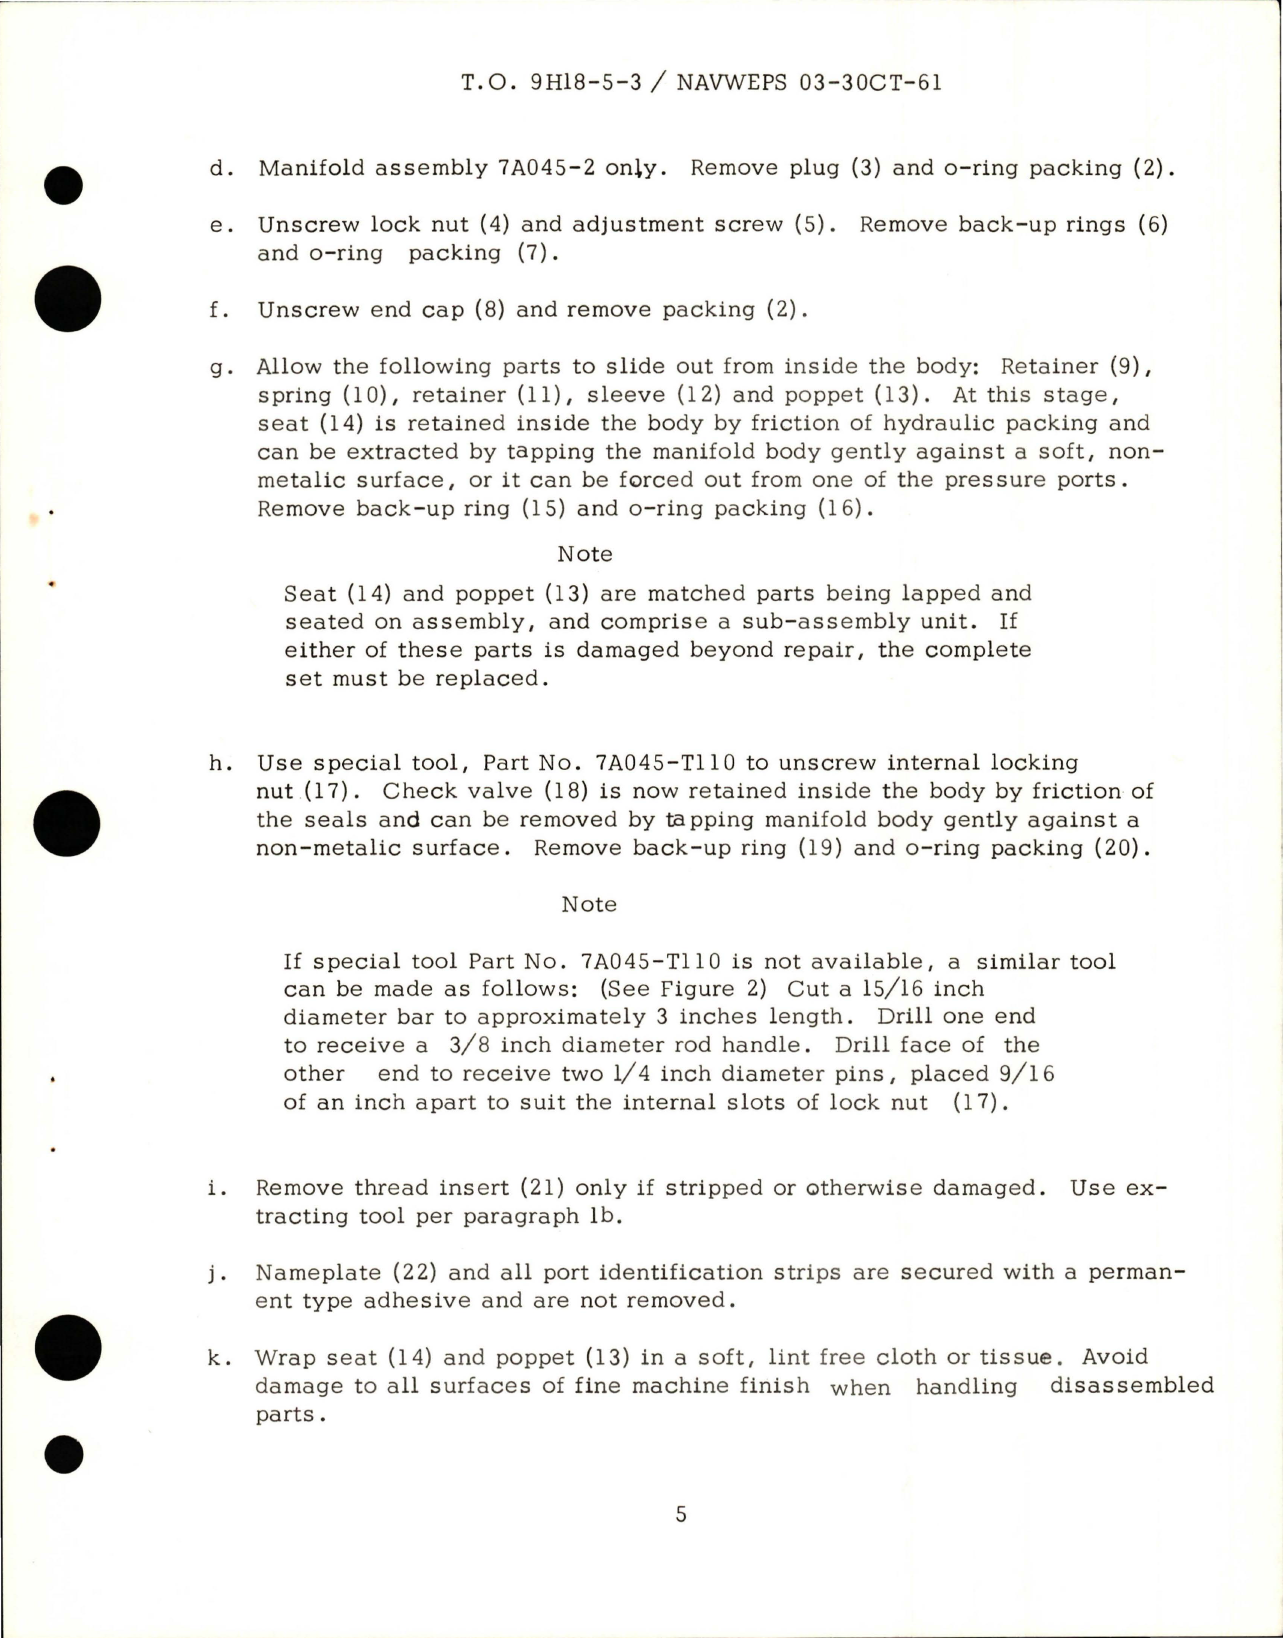 Sample page 5 from AirCorps Library document: Overhaul Instructions with Parts for Manifold Assembly w Pressure Relief and Check HYD - Parts 7A045-1 and 7A045-2